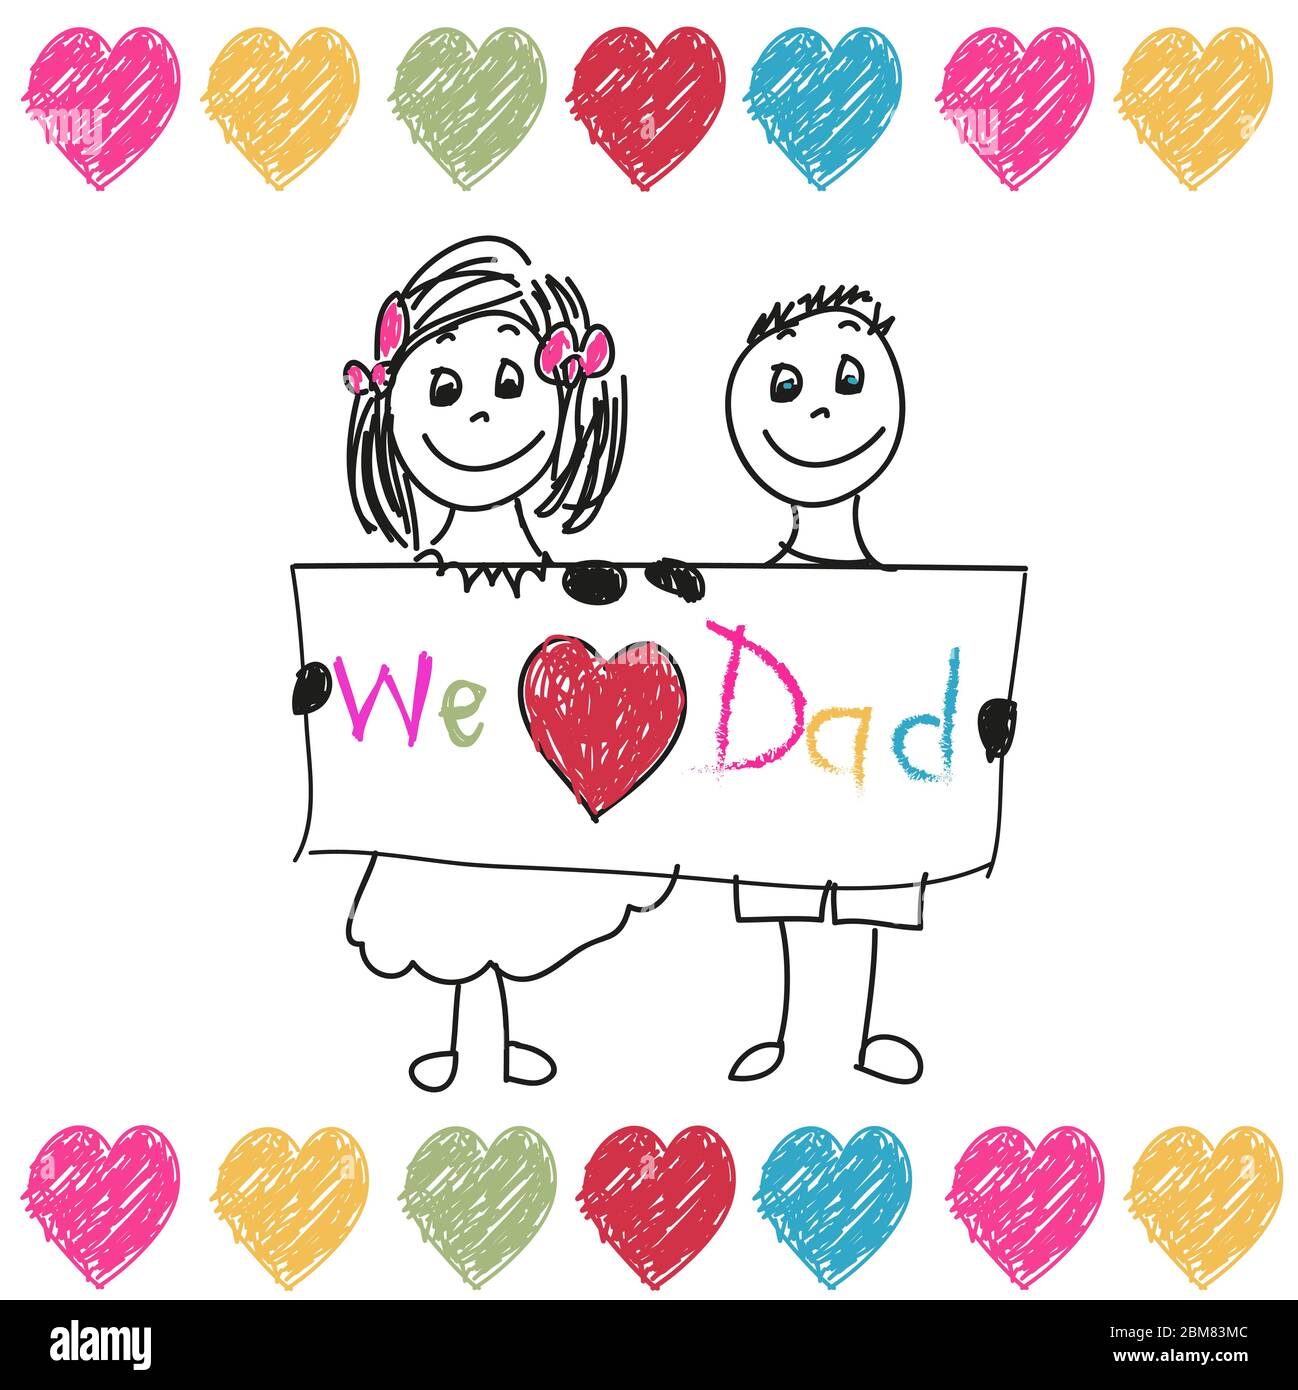 Happy Father S Day Kids Vector We Love You Dad Father S Day Doddle Greeting Card Illustration Stock Vector Image Art Alamy